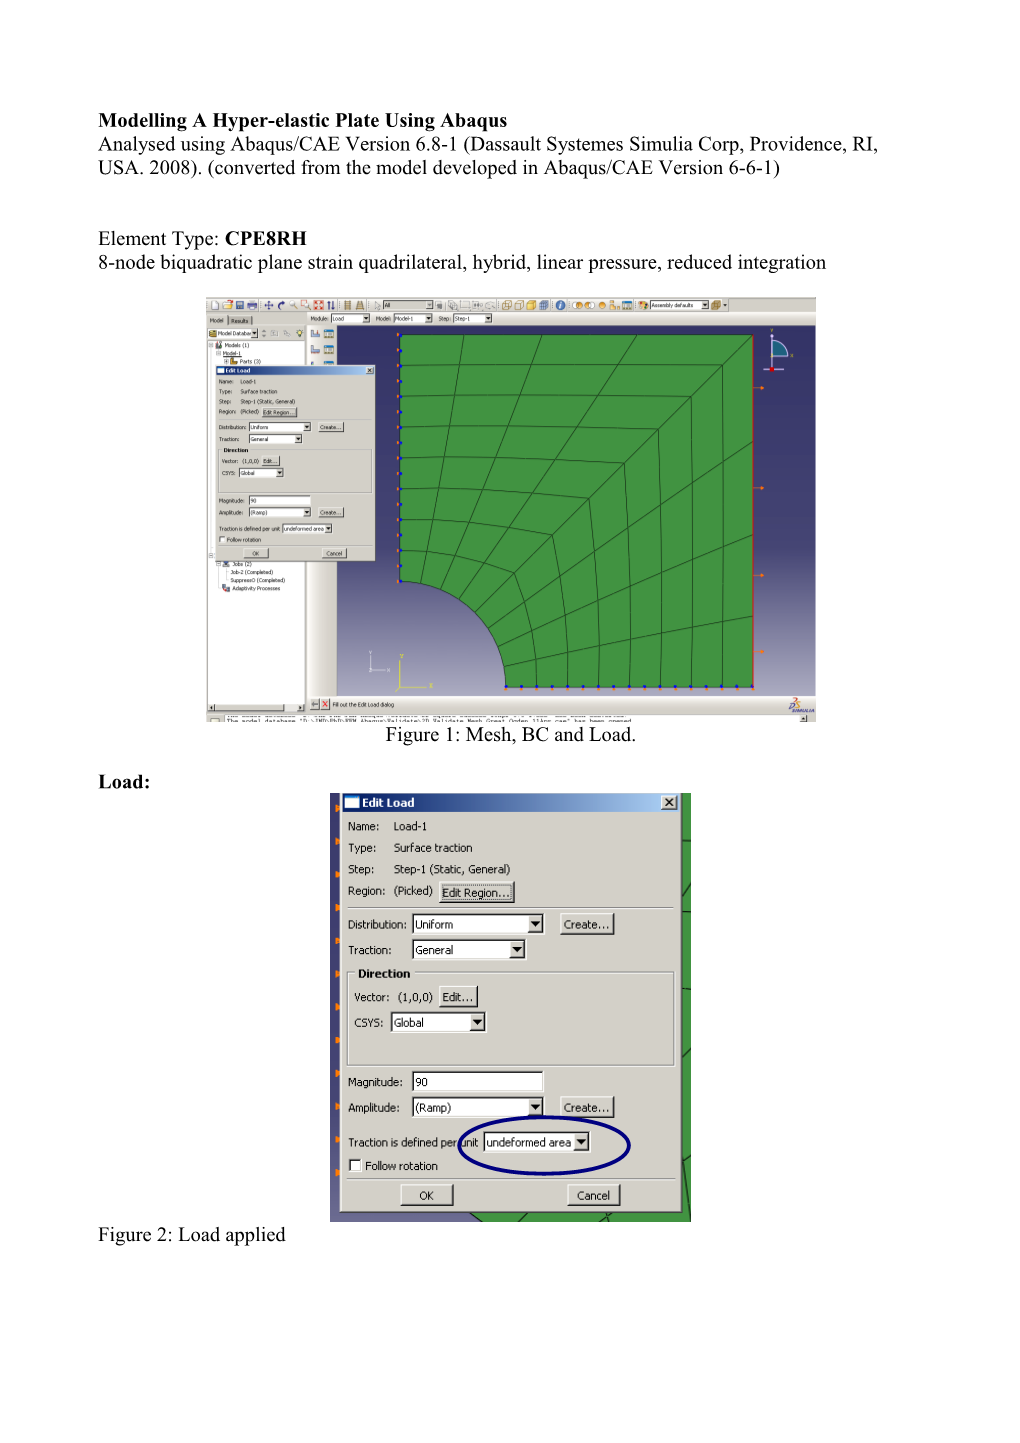 Modelling a Hyper-Elastic Plate Using Abaqus